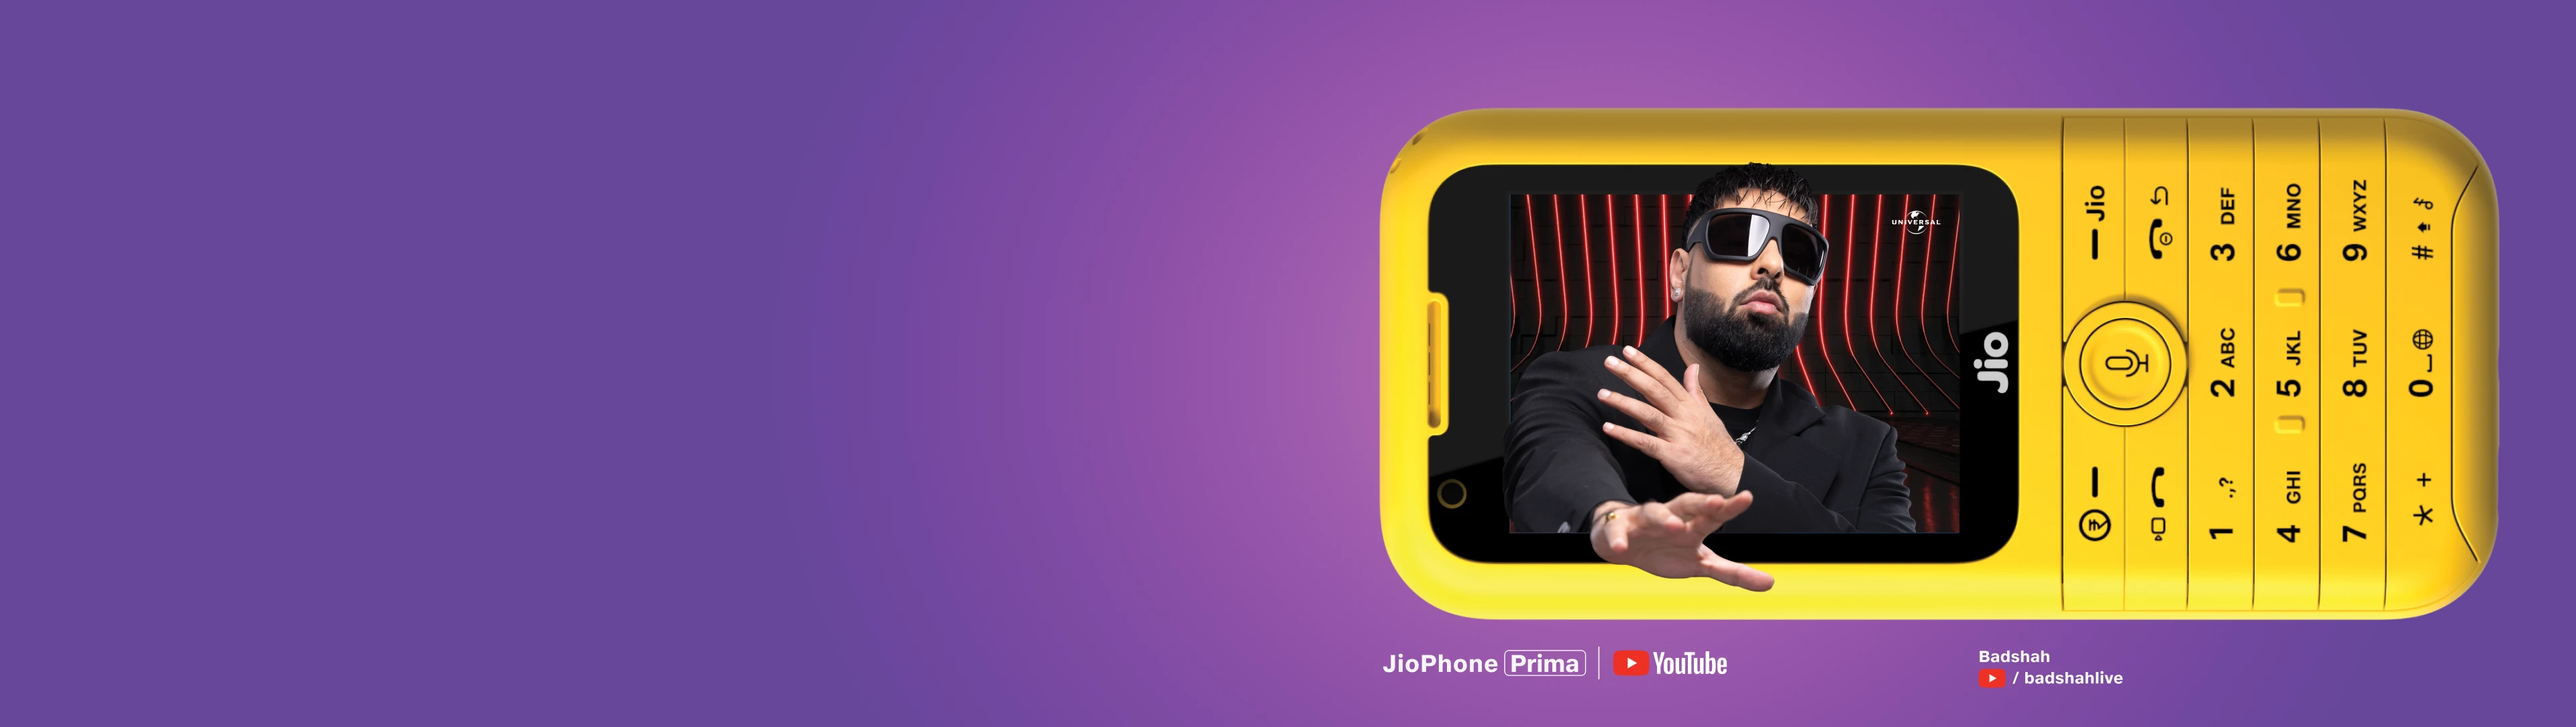 Watch YouTube on the all-new JioPhone Prima